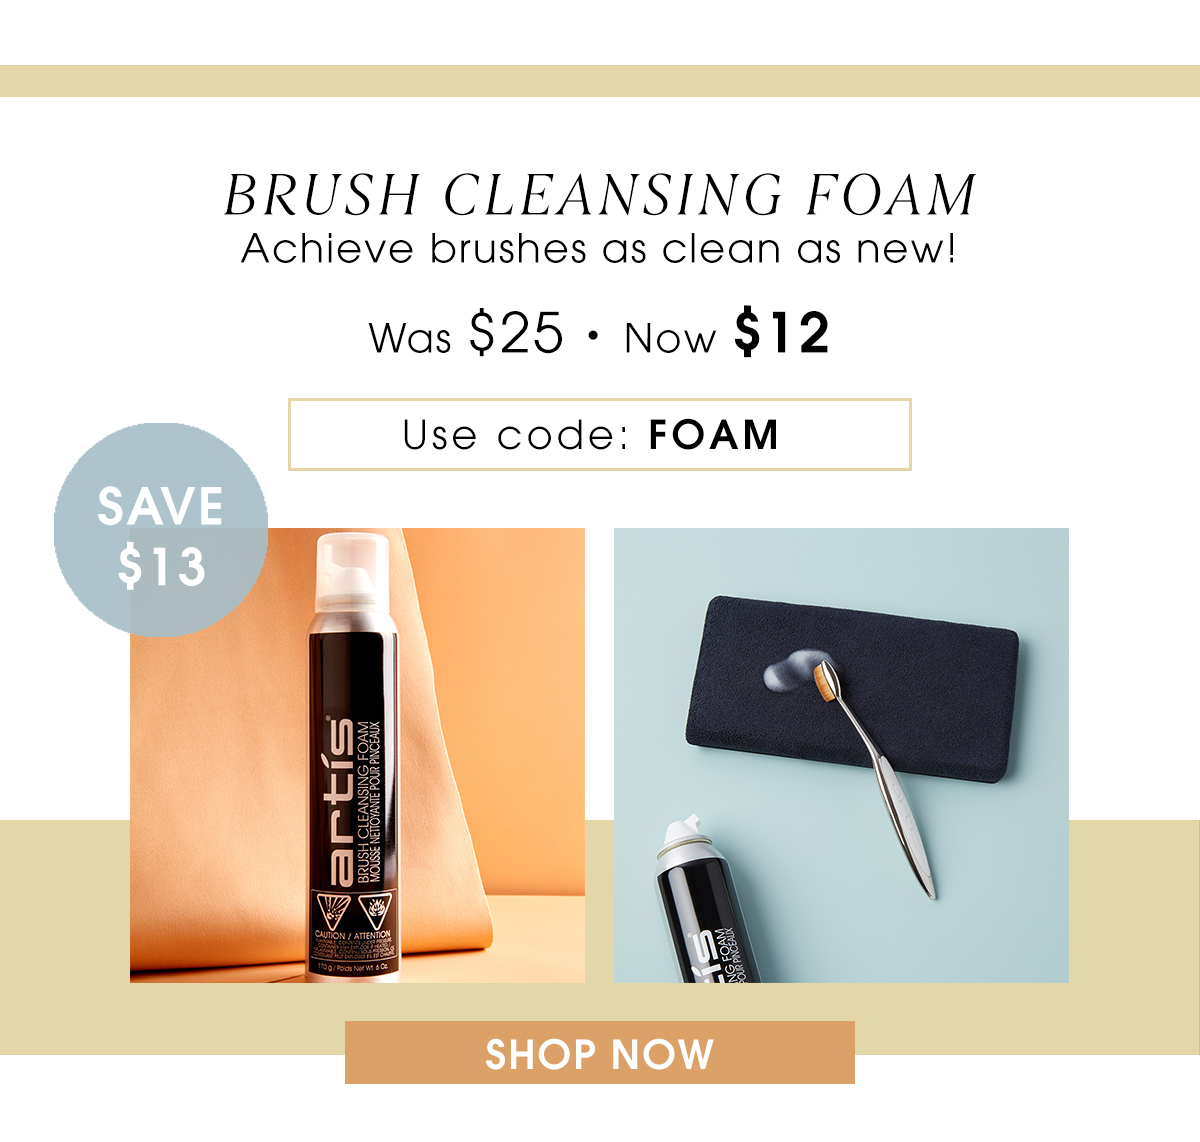 Brush Cleansing Foam, now $12 SHOP NOW